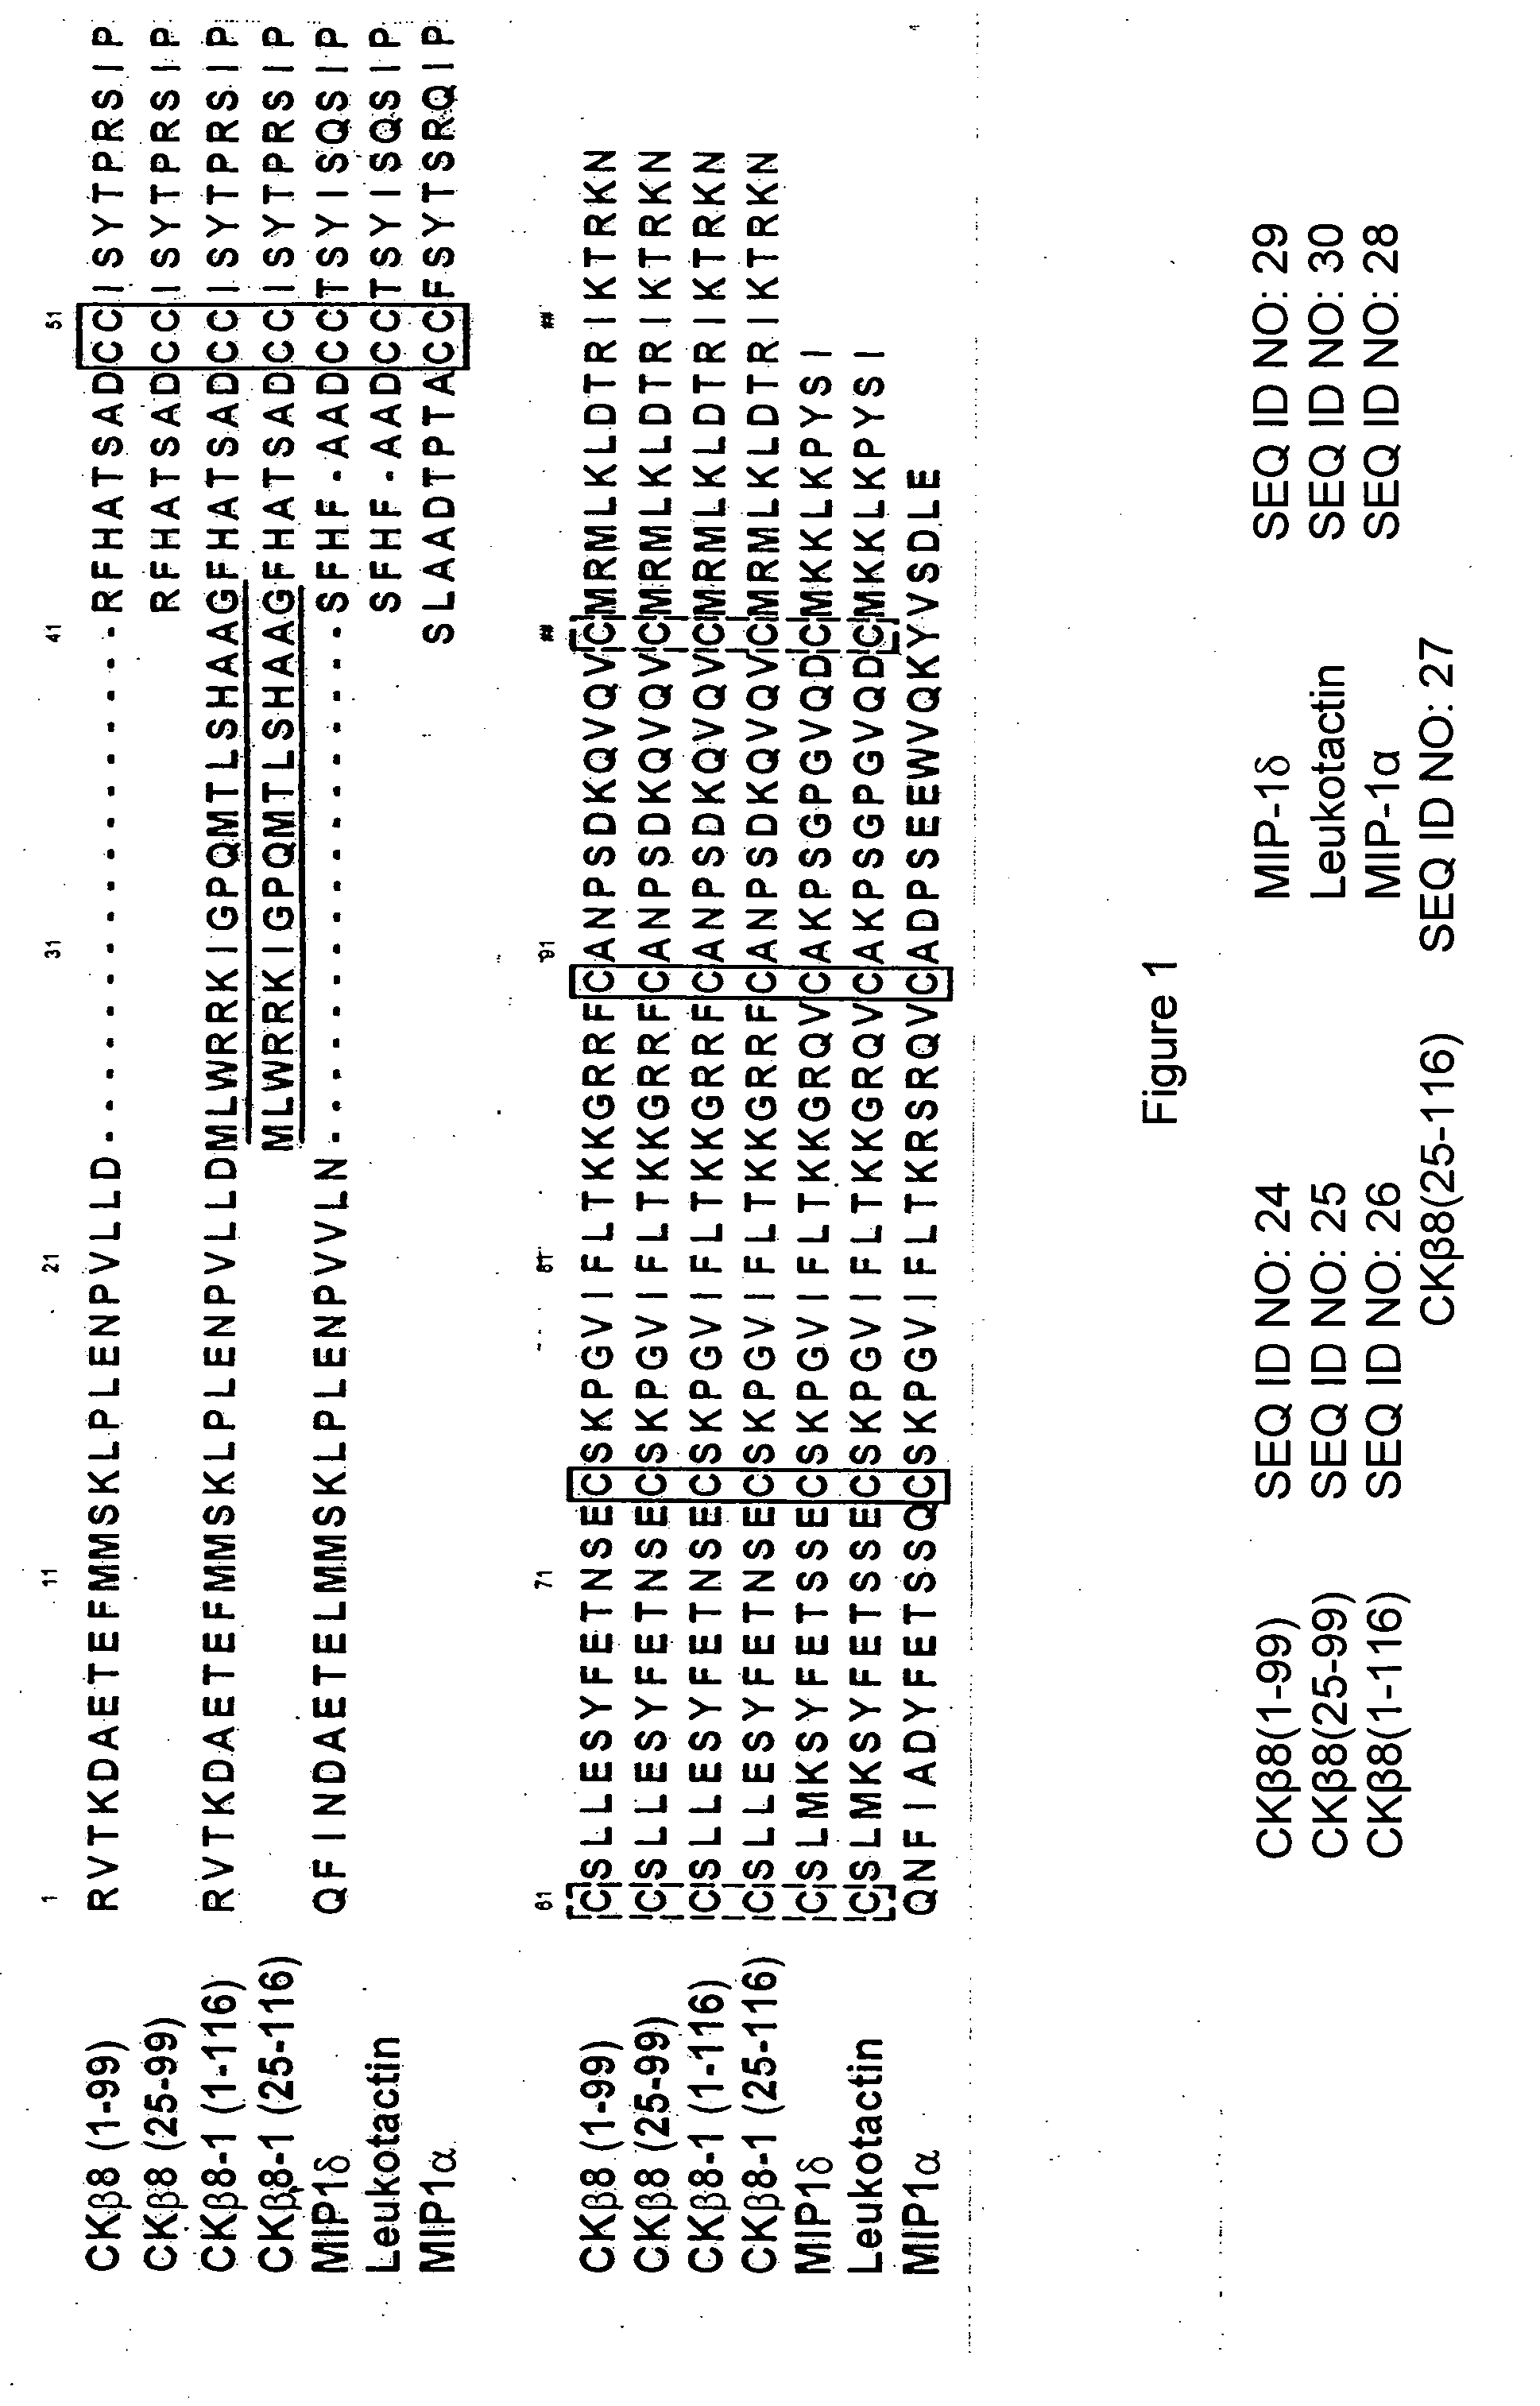 Compositions and methods for enhancing immunity by chemoattractant adjuvants